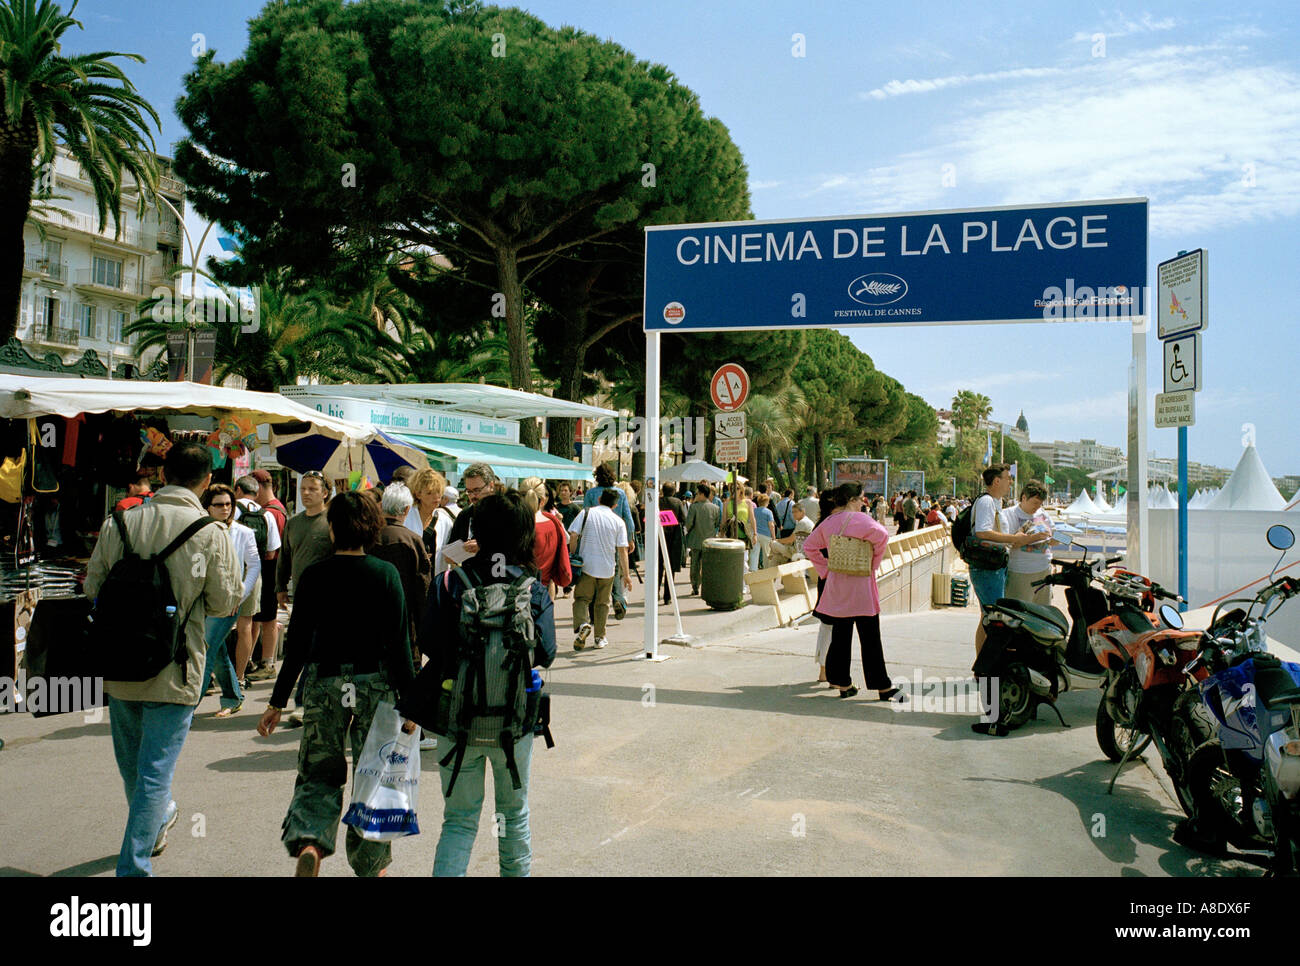 During the 2005 Cannes Film Festival the Cinema de la Plage Beach showed openair screenings of classic films Stock Photo